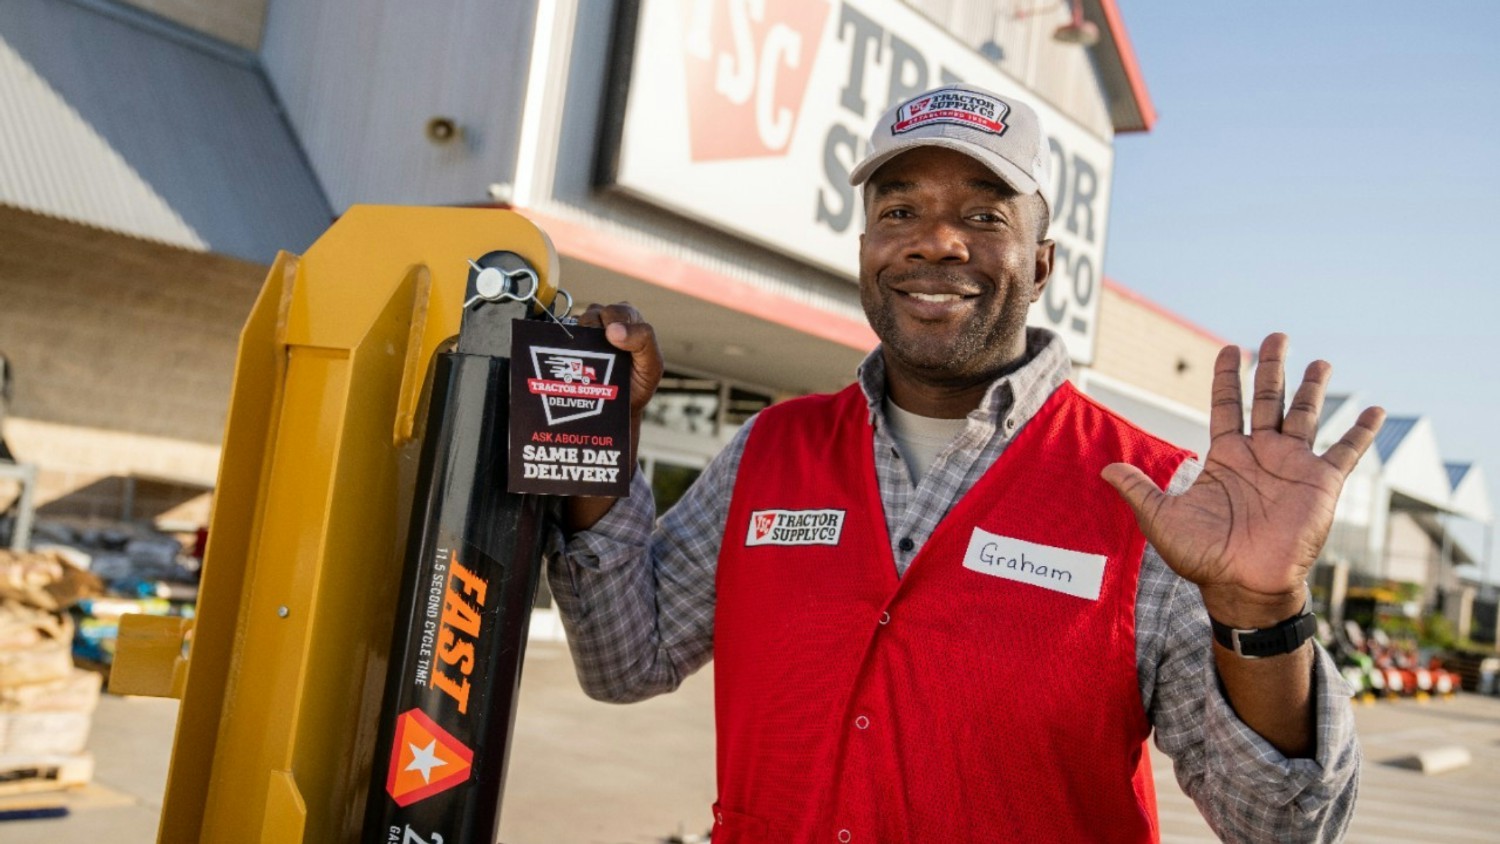 At Tractor Supply, we believe in having fun while working. Our Team Members greet customers with smiles on their faces. 